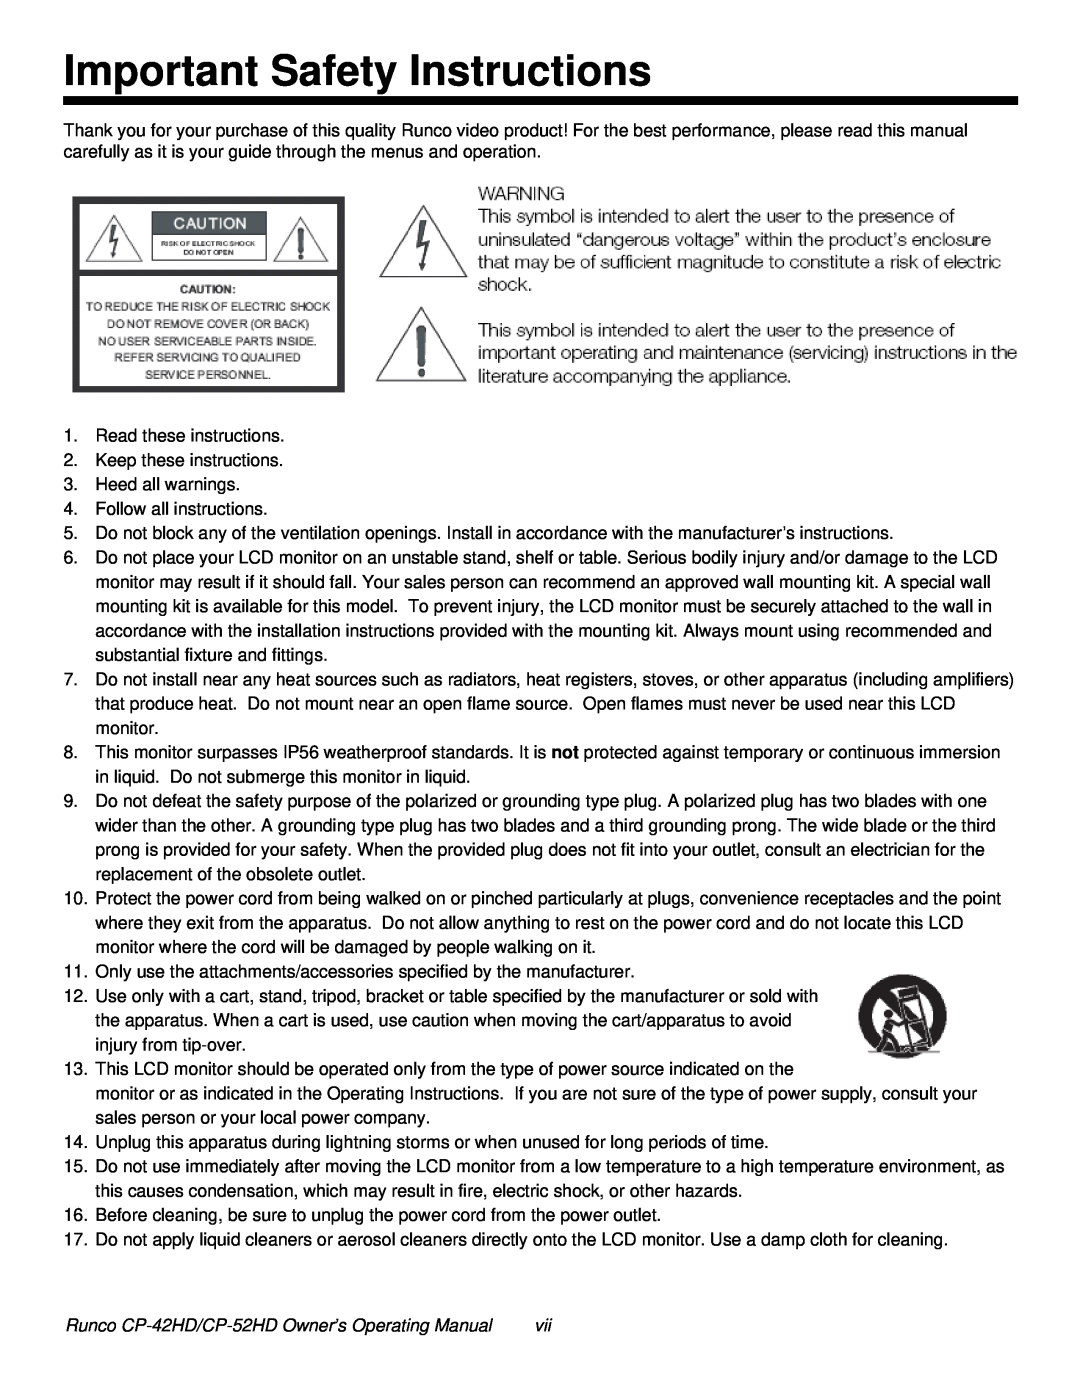 Runco CP-52HD, CP-42HD manual Important Safety Instructions 